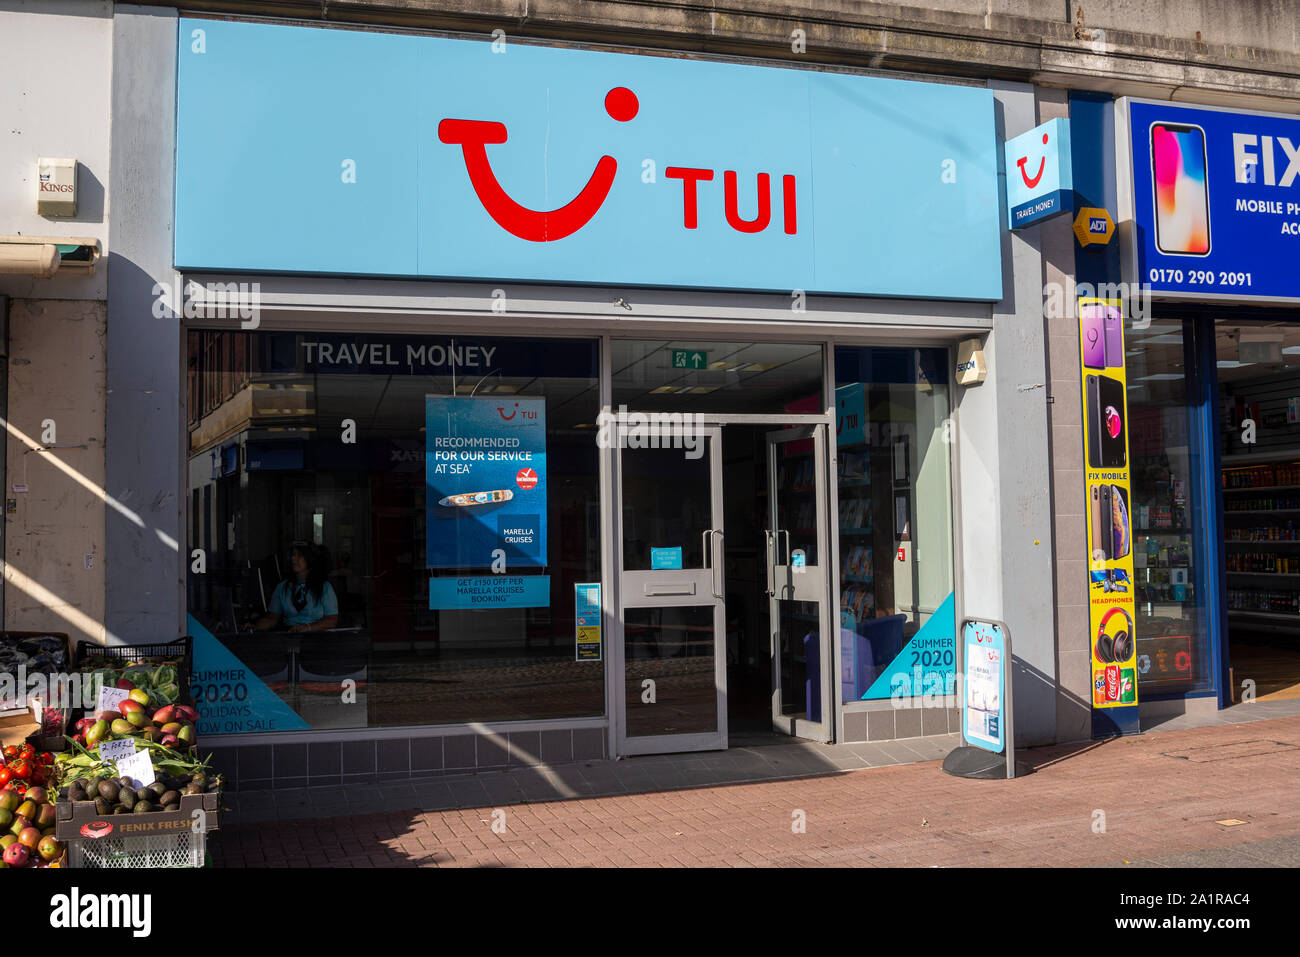 is tui a multiple travel agent